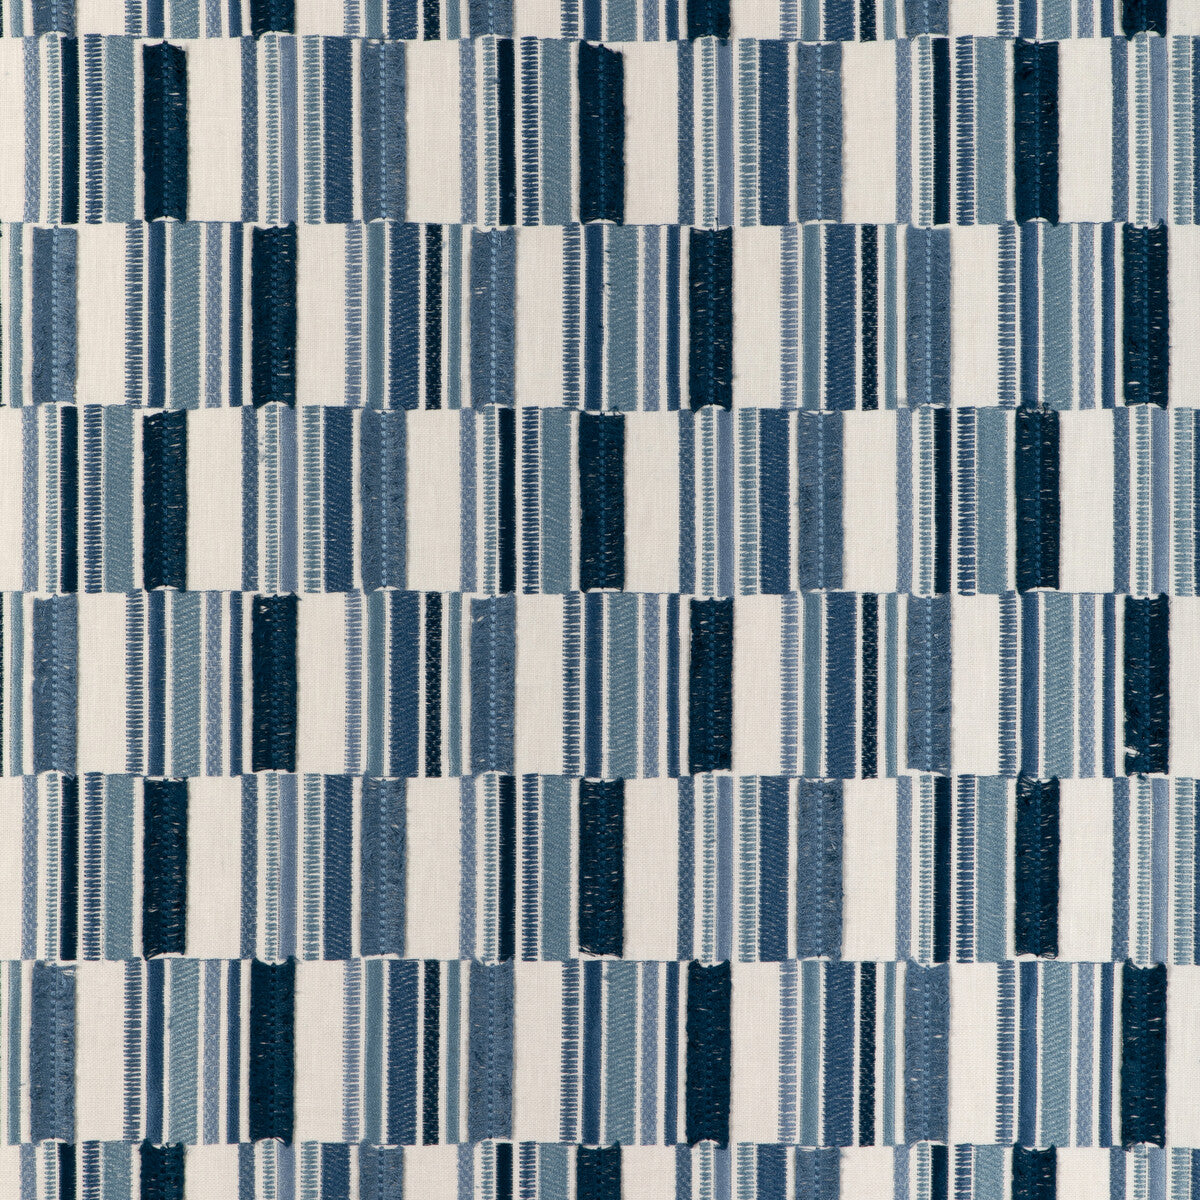 Kravet Basics fabric in 37158-51 color - pattern 37158.51.0 - by Kravet Basics in the Modern Embroideries III collection